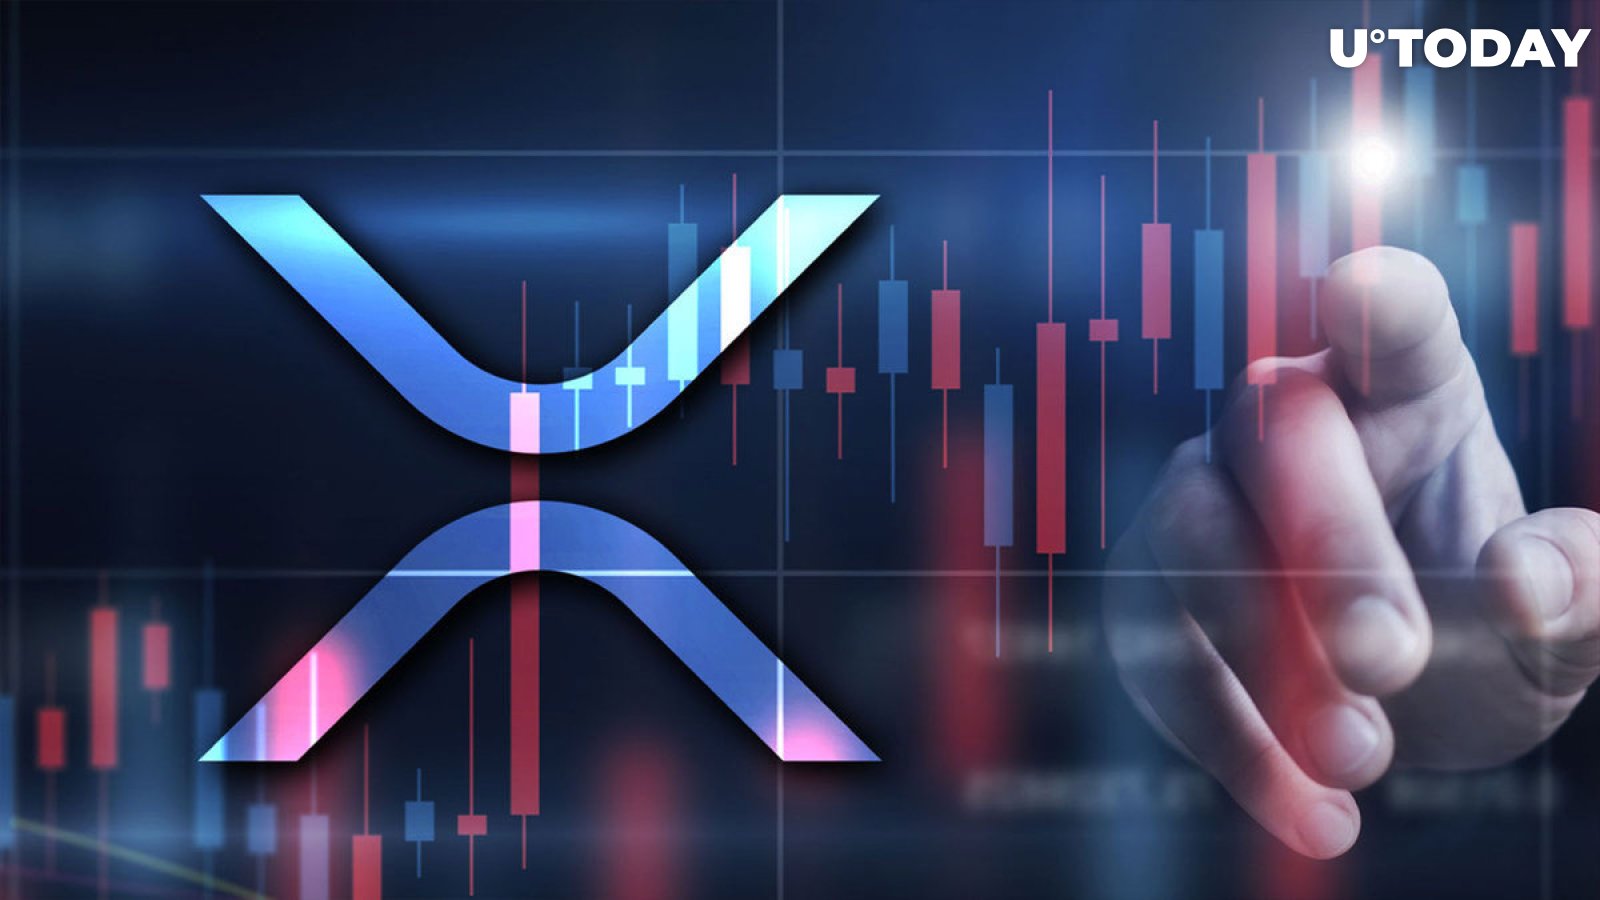 XRP up 2.45%, Here Are 2 Key Growth Triggers to Watch out For